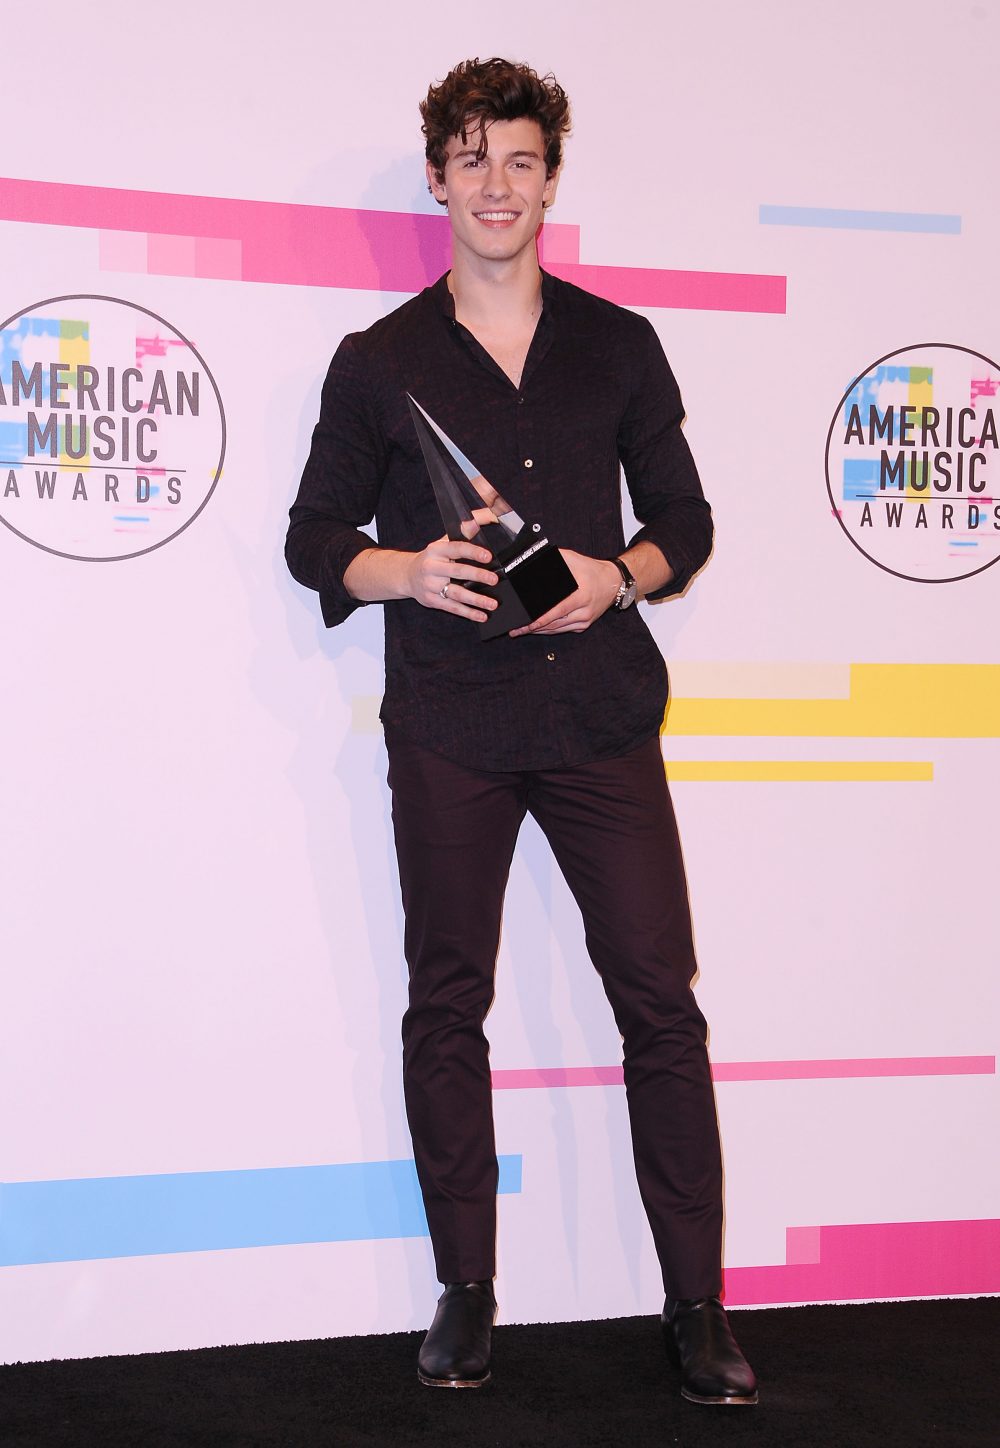 American Music Awards Shawn Mendes